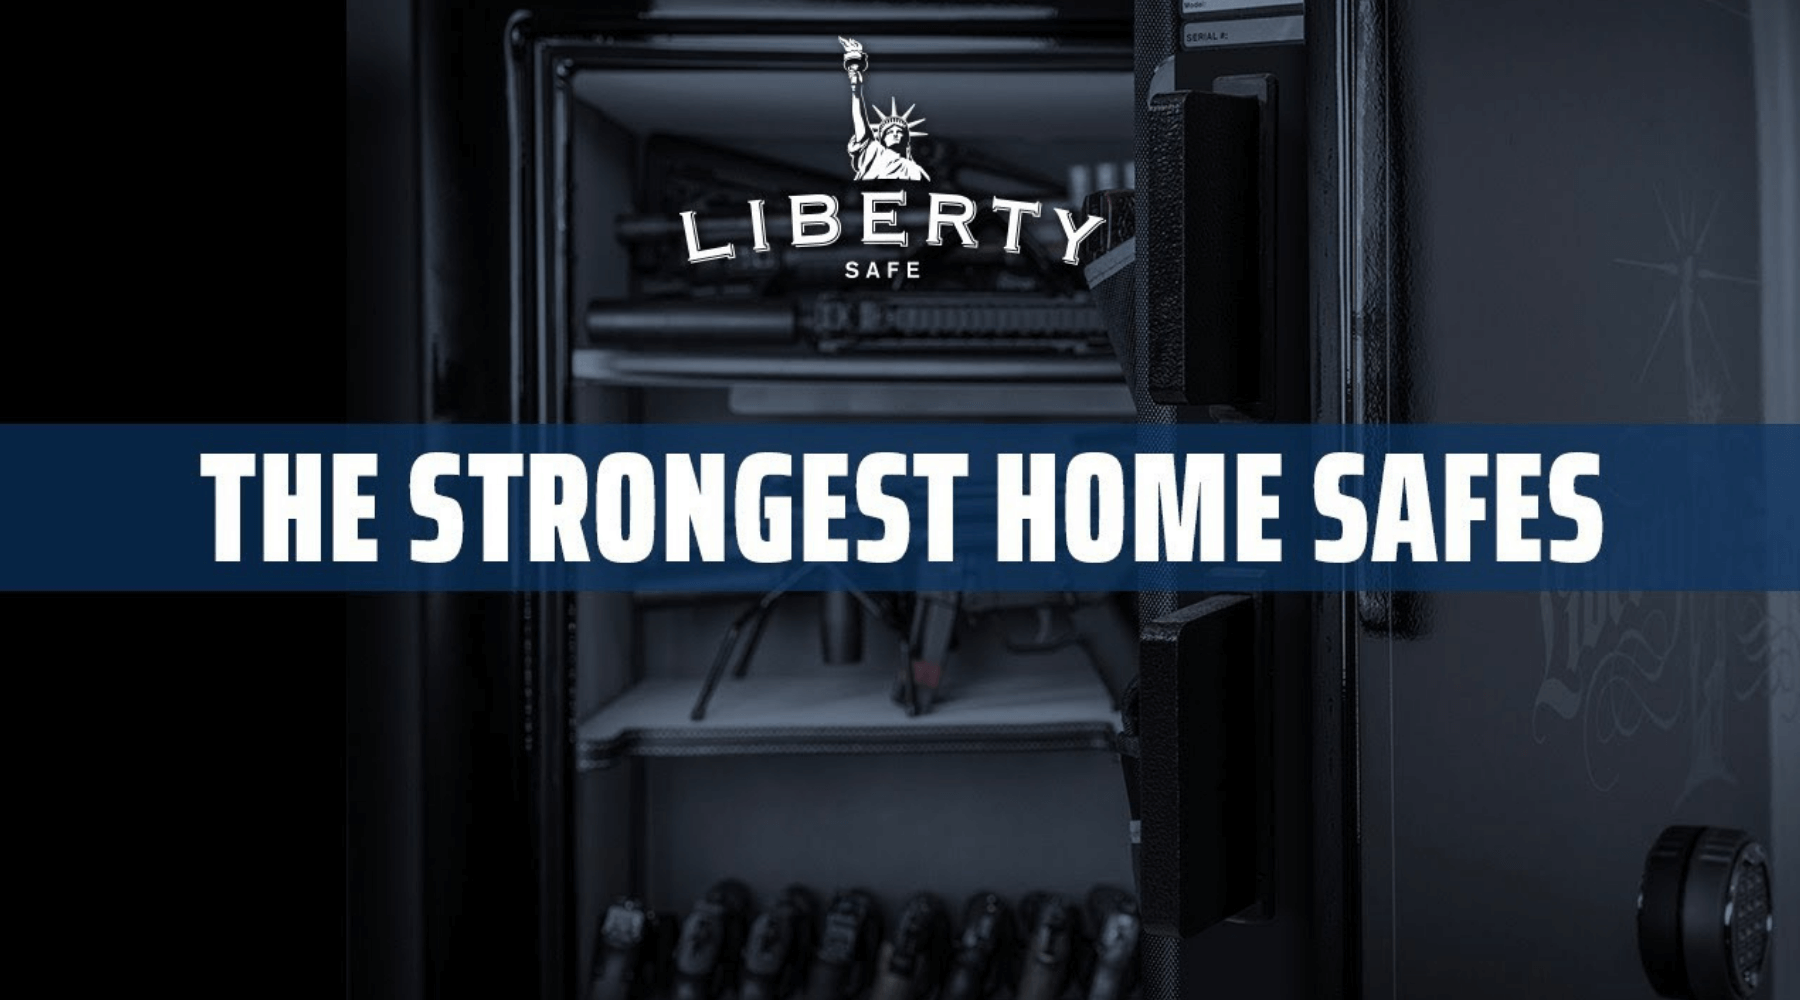 Liberty-safe-the-strongest-home-safes